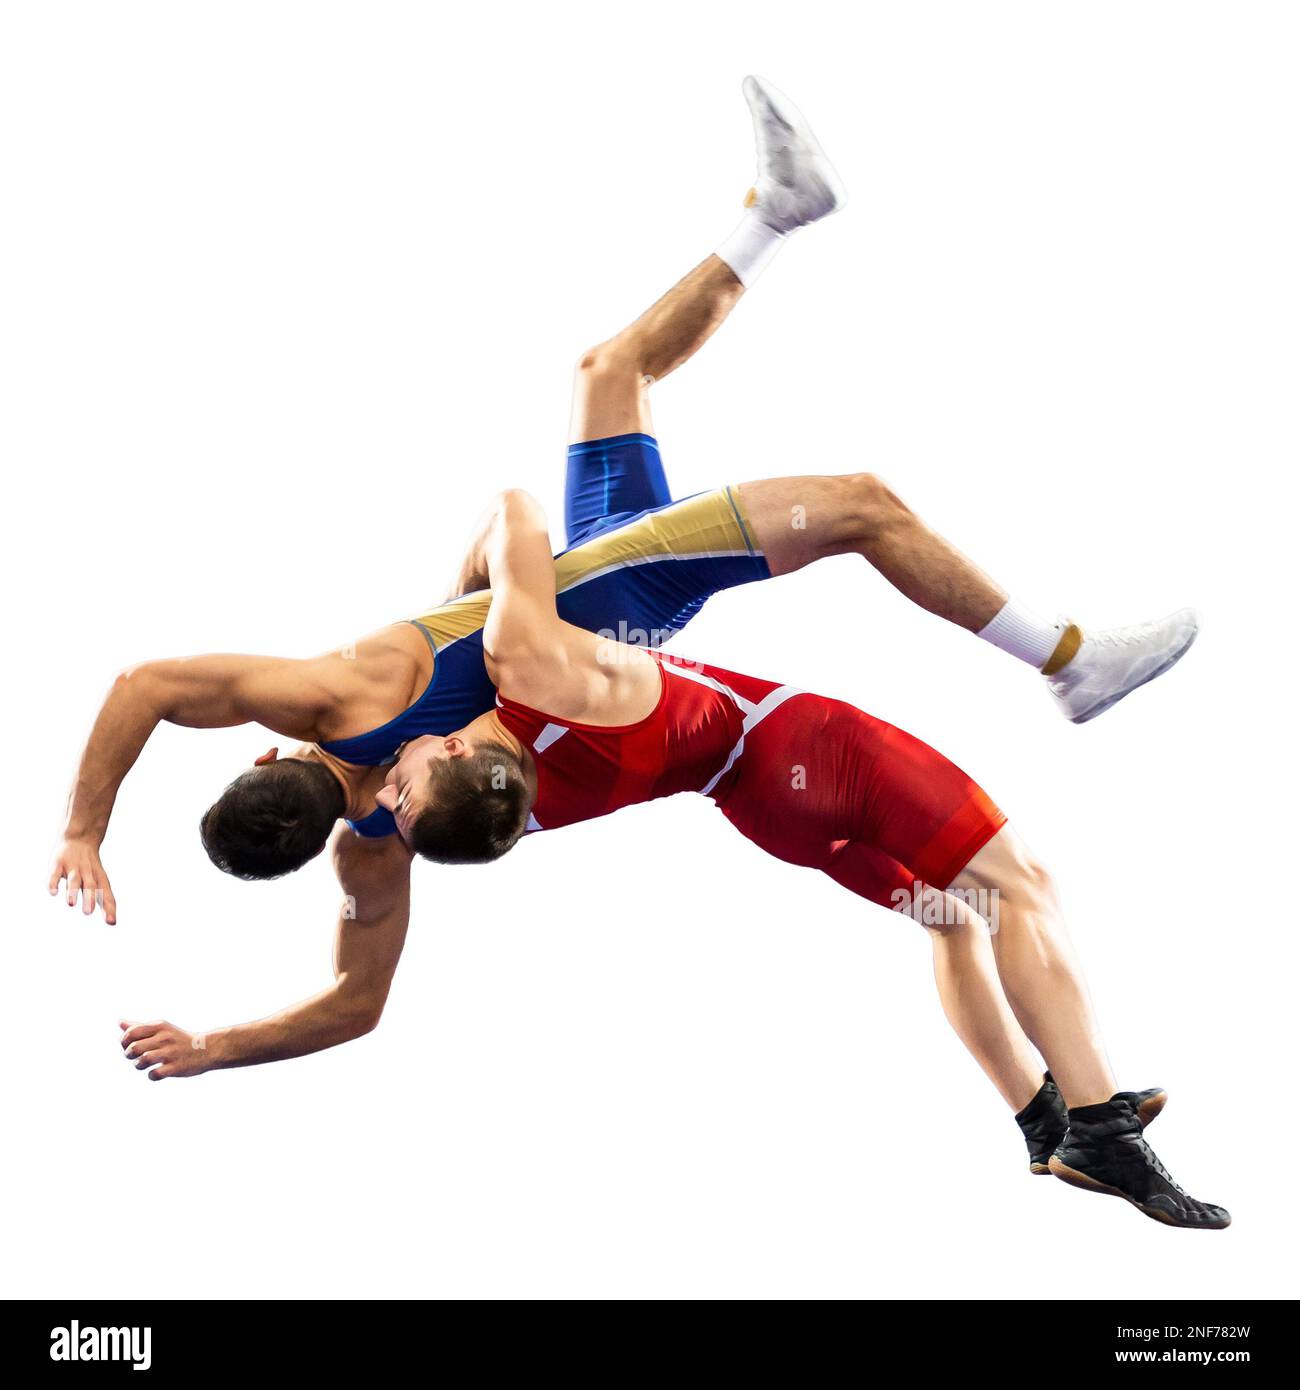 Blank Wrestling Mat Template With Text Space For Customization Stock Photo  - Download Image Now - iStock